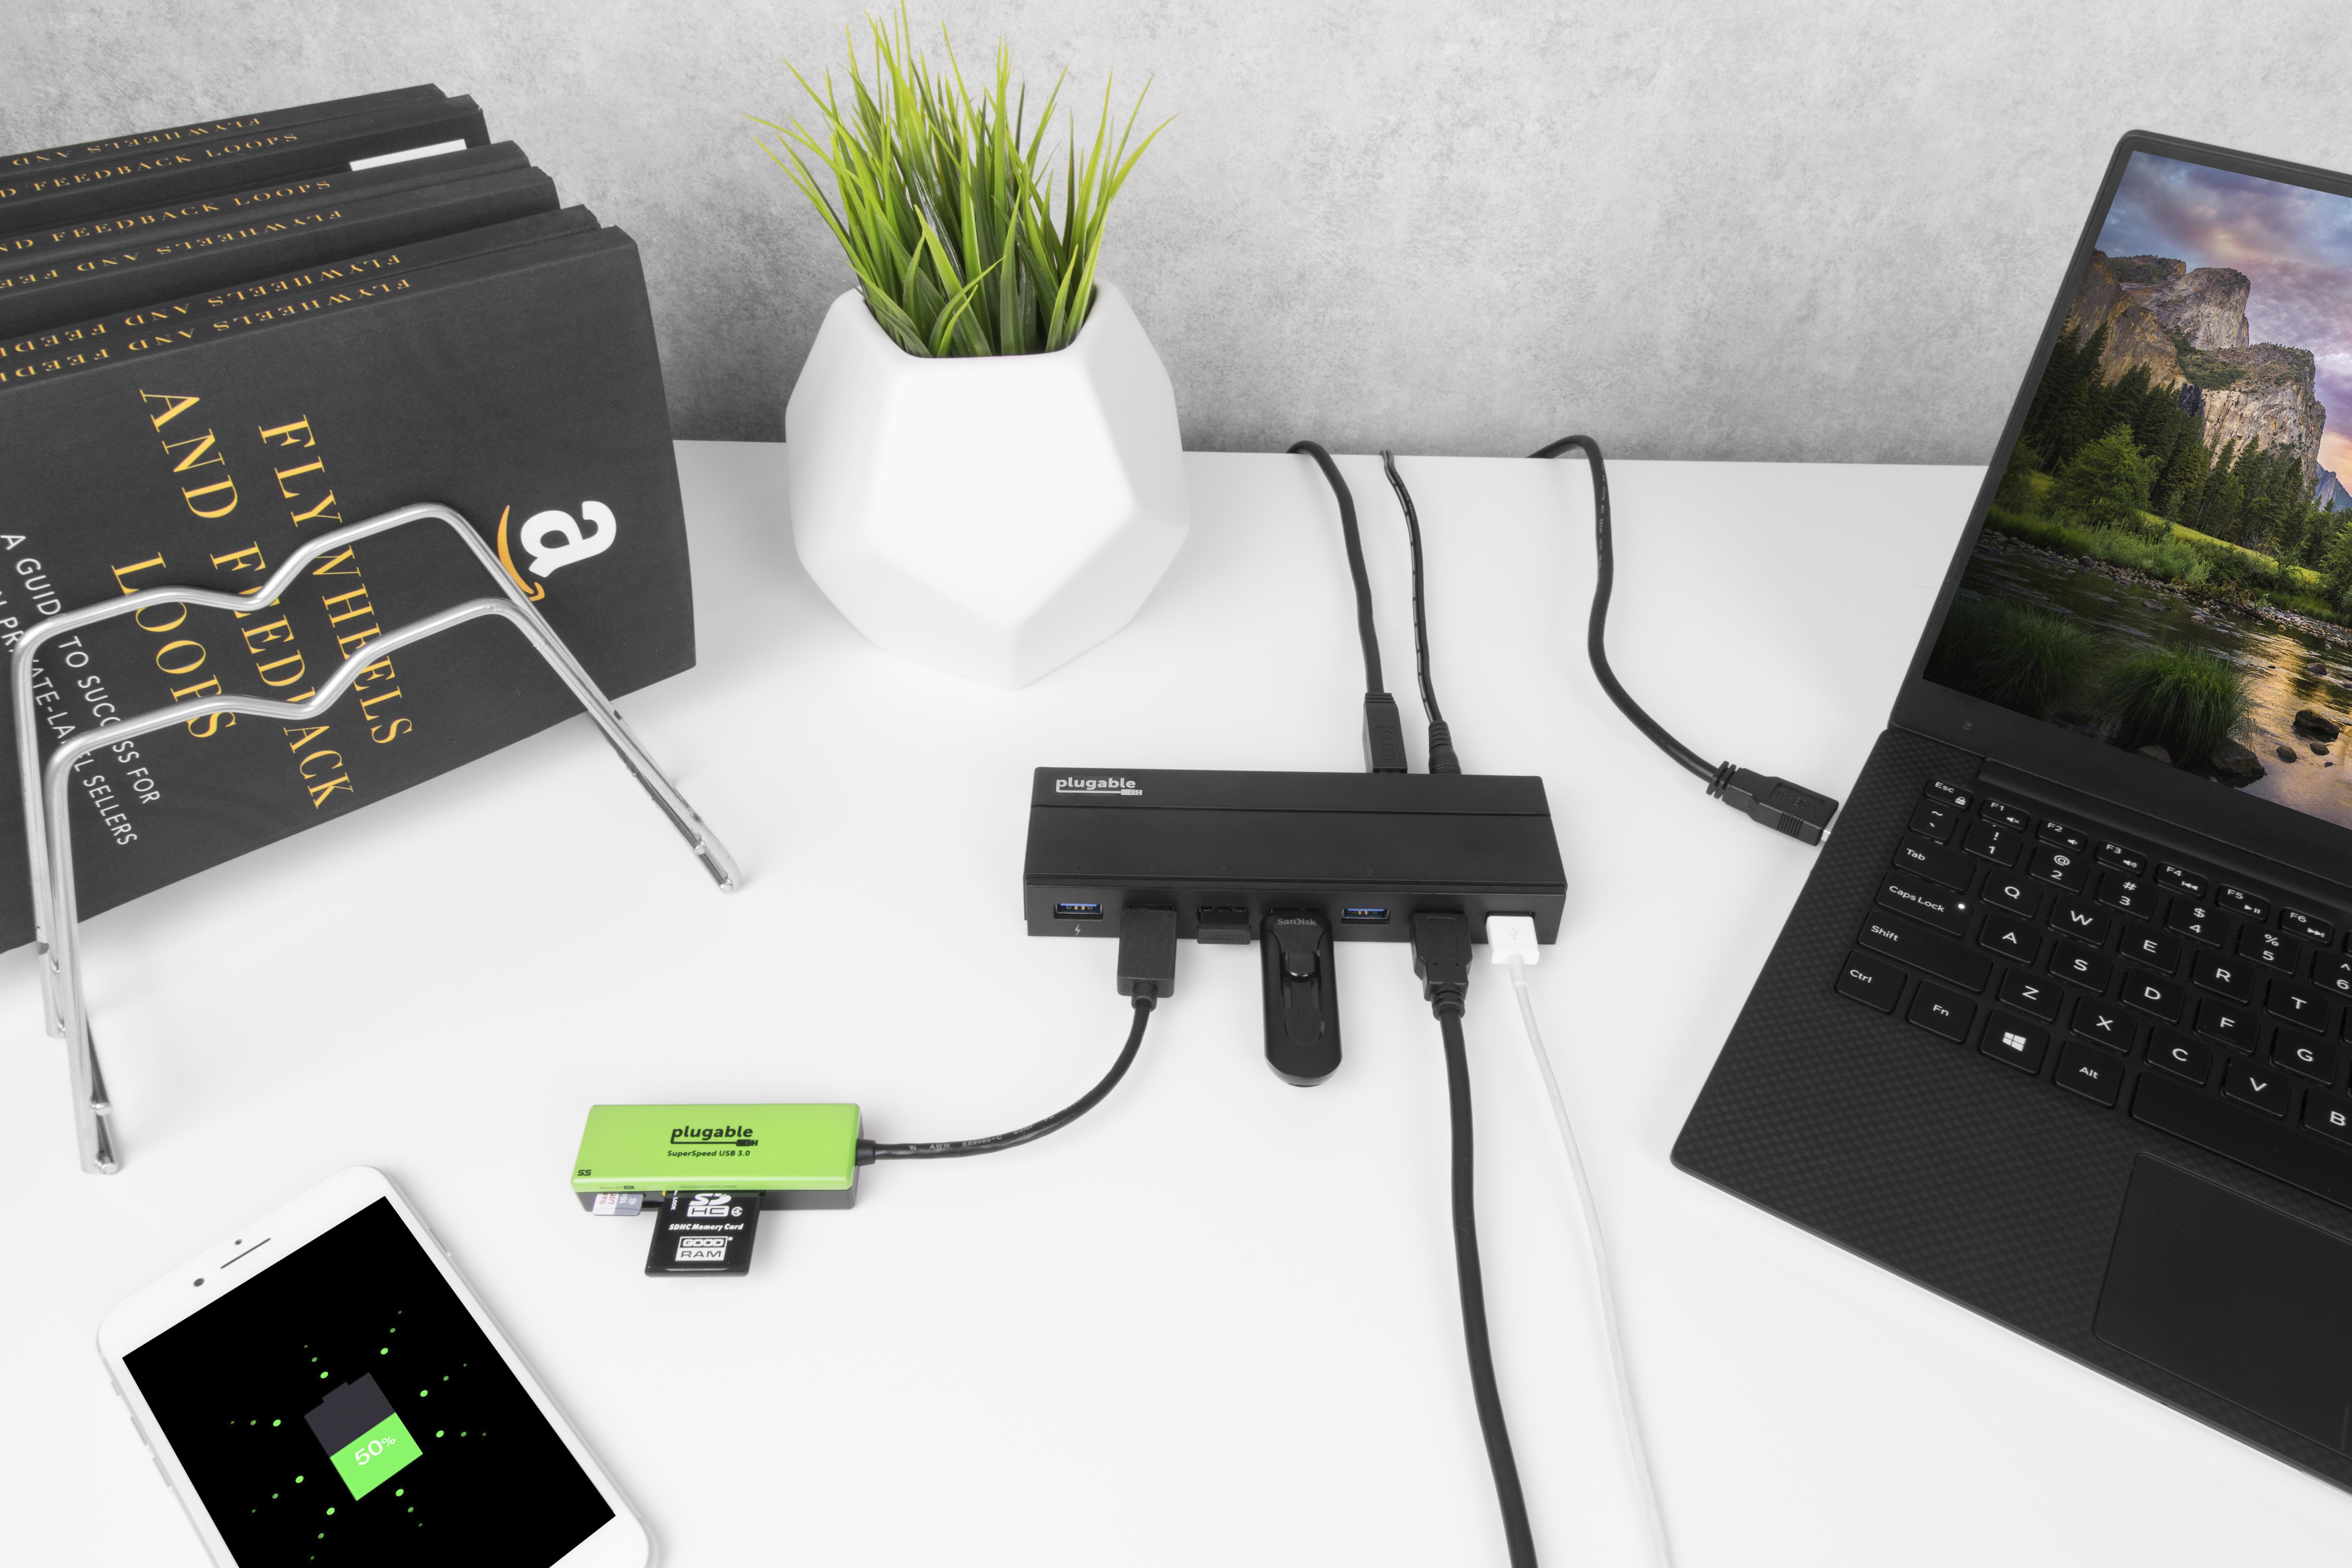 Plugable 7-Port USB 3.0 Hub with 36W Power Adapter - image 2 of 4